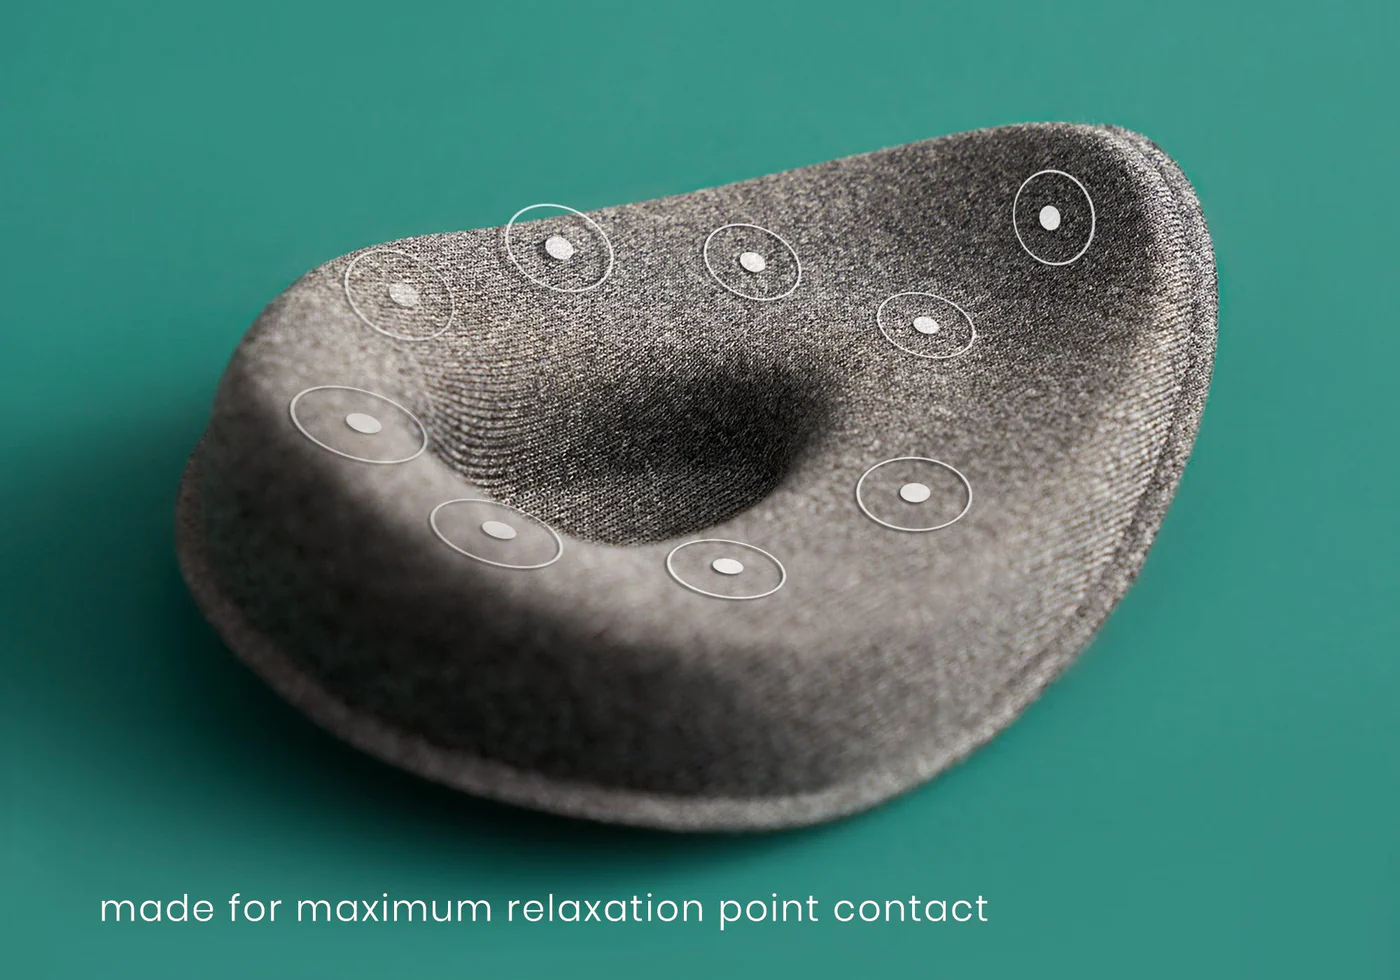 The extra tapered eye cup of a gray weighted sleep mask with beads. There is an indentation on the cup to keep direct pressure off the eyes.